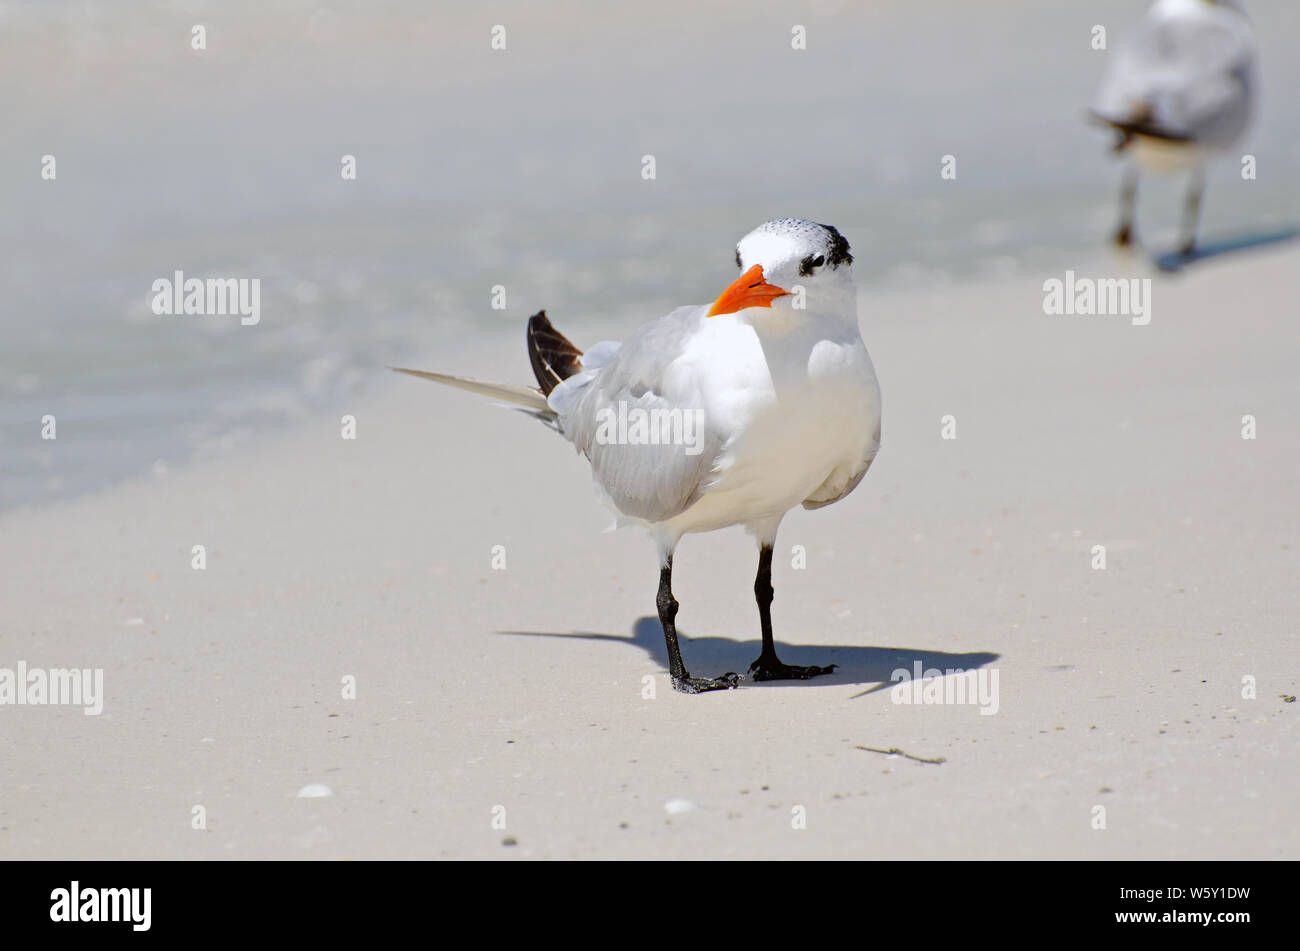 A royal tern with a red-orange bill, patchy winter cap, white neck, grey wings, and black webbed feet standing on a tan beach staring forward. Stock Photo